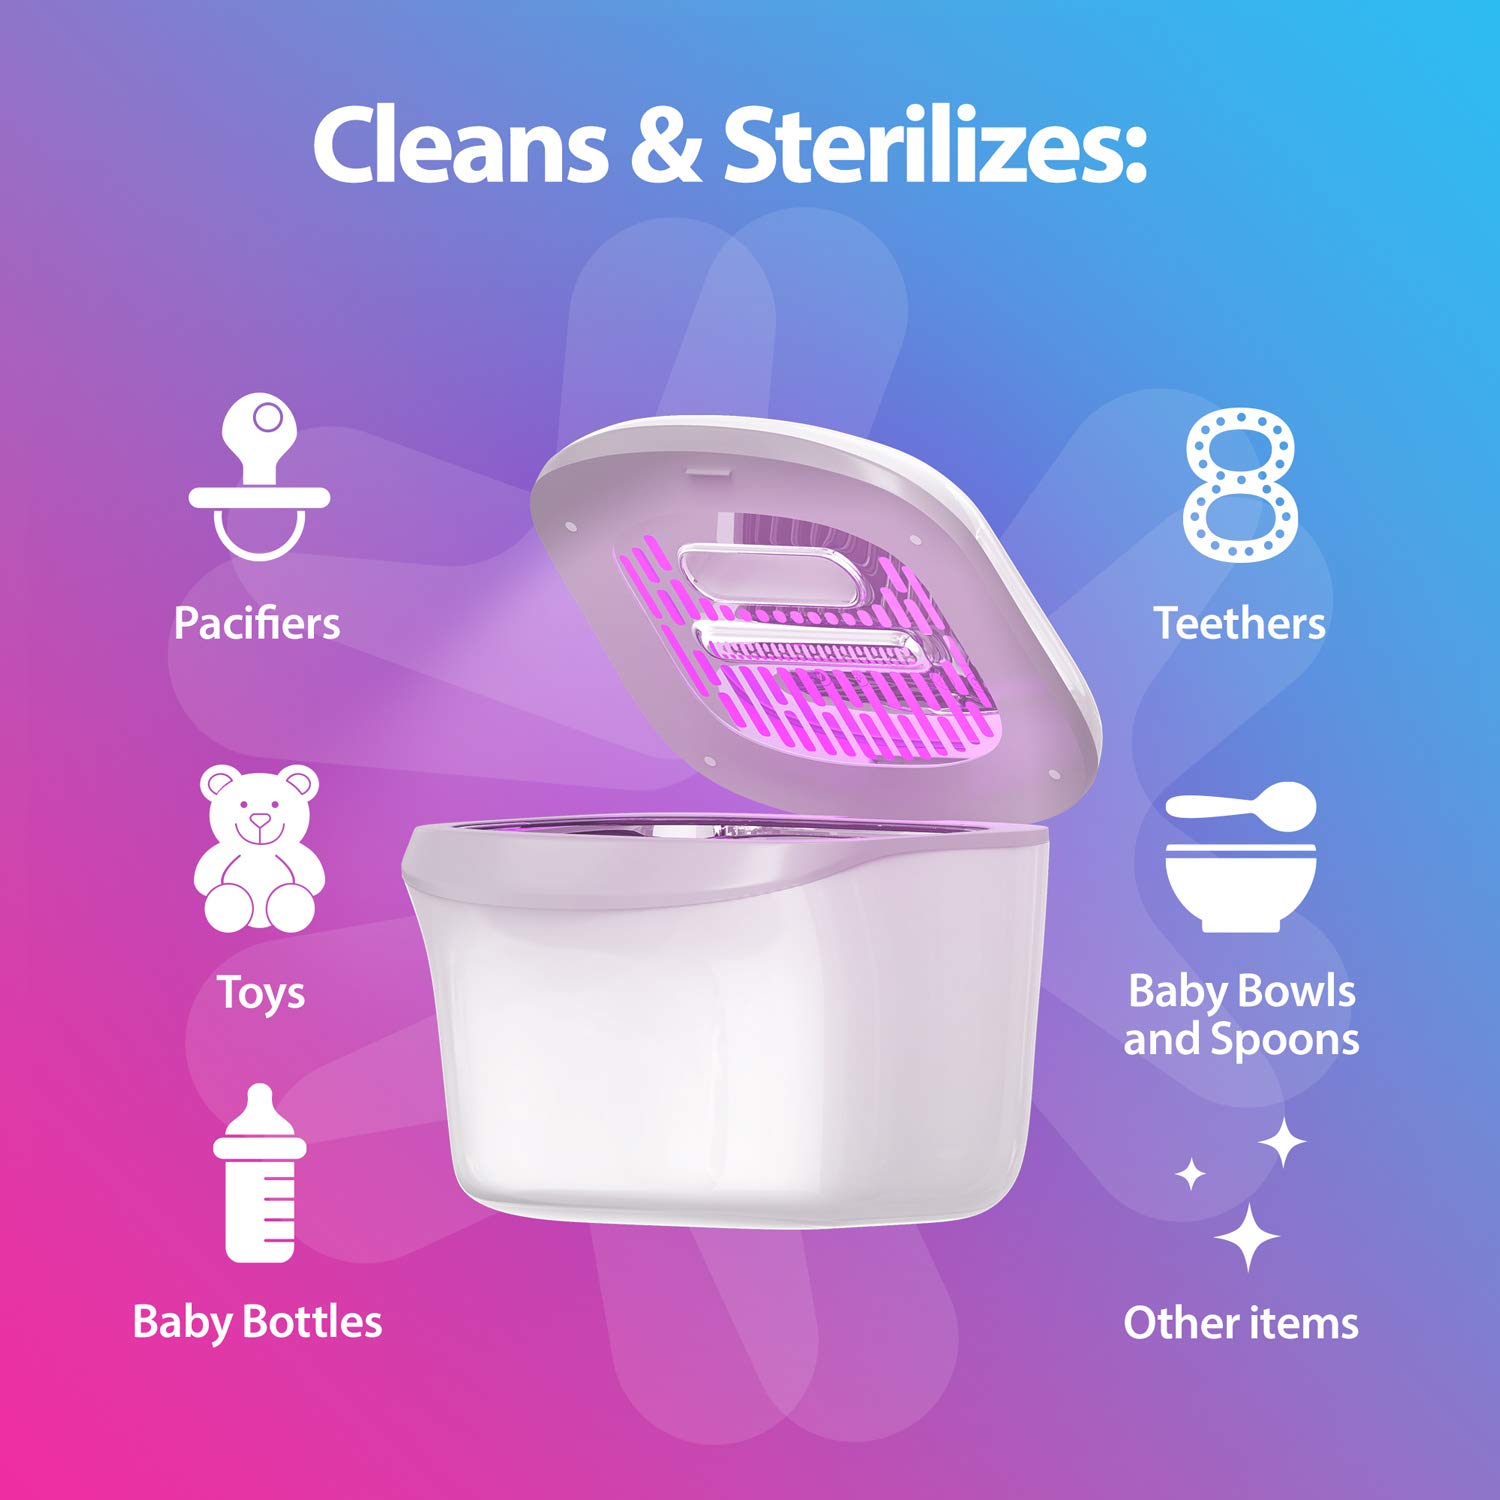 UV Light Sanitizer Box for Disinfection - Ultraviolet LED Sterilizer and Dryer Device for Baby Bottles, Cell Phone, Toothbrush and Personal Items